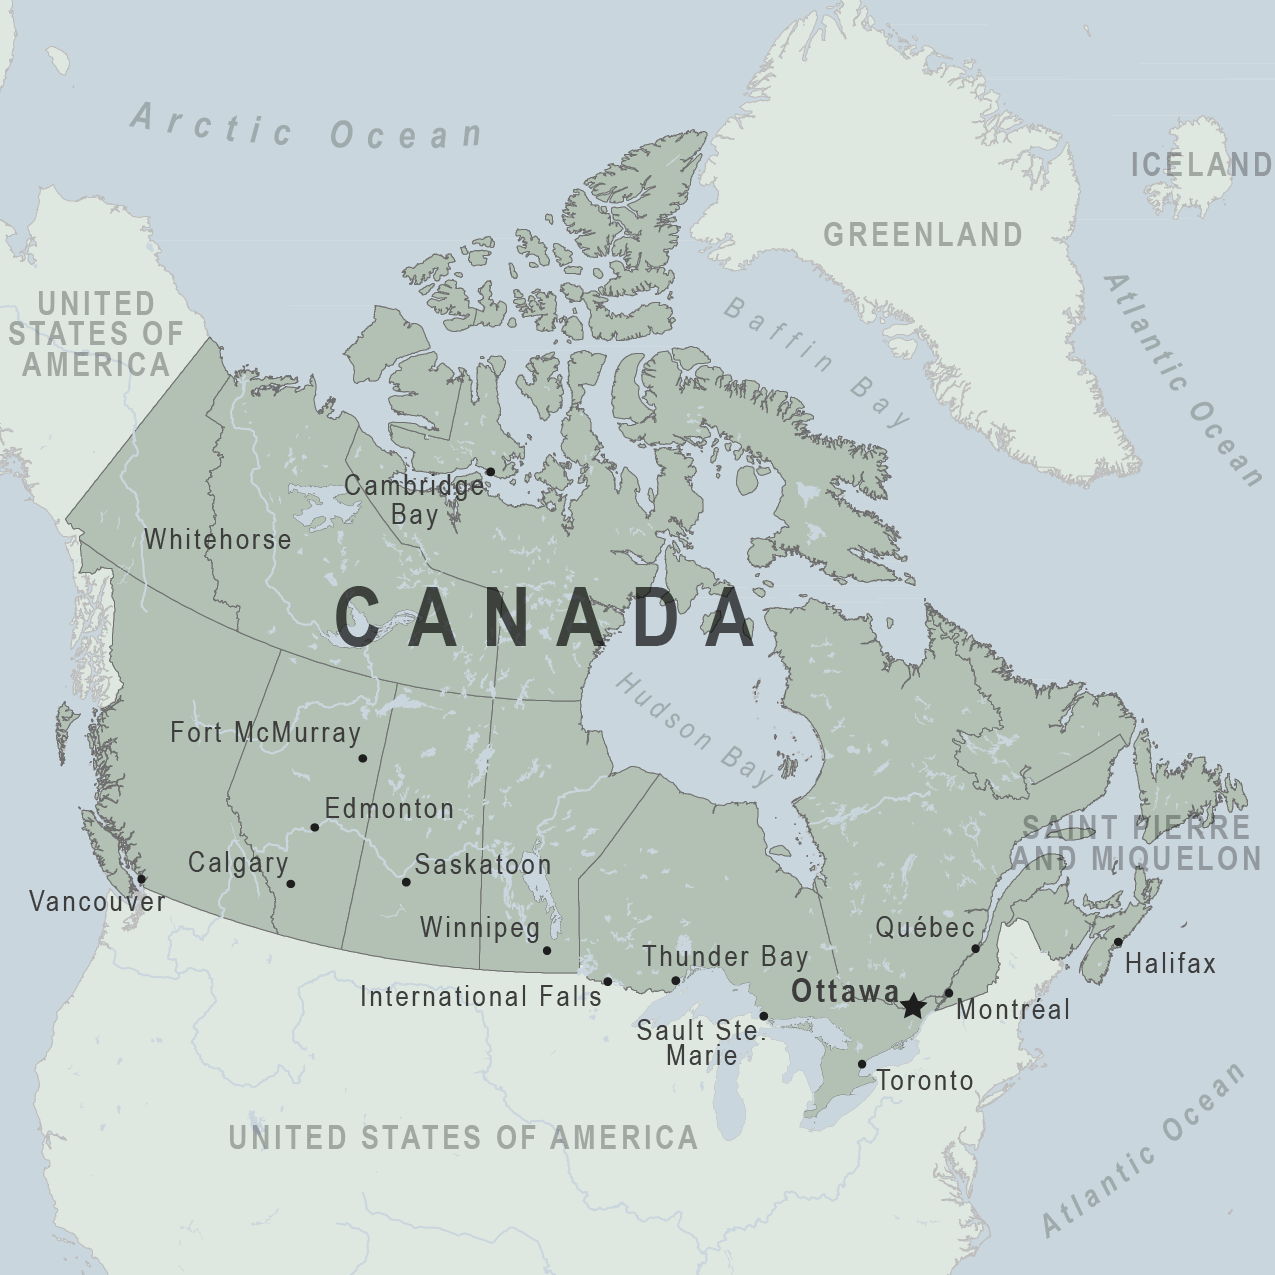 Guide on How to Travel to Canada Without Passports